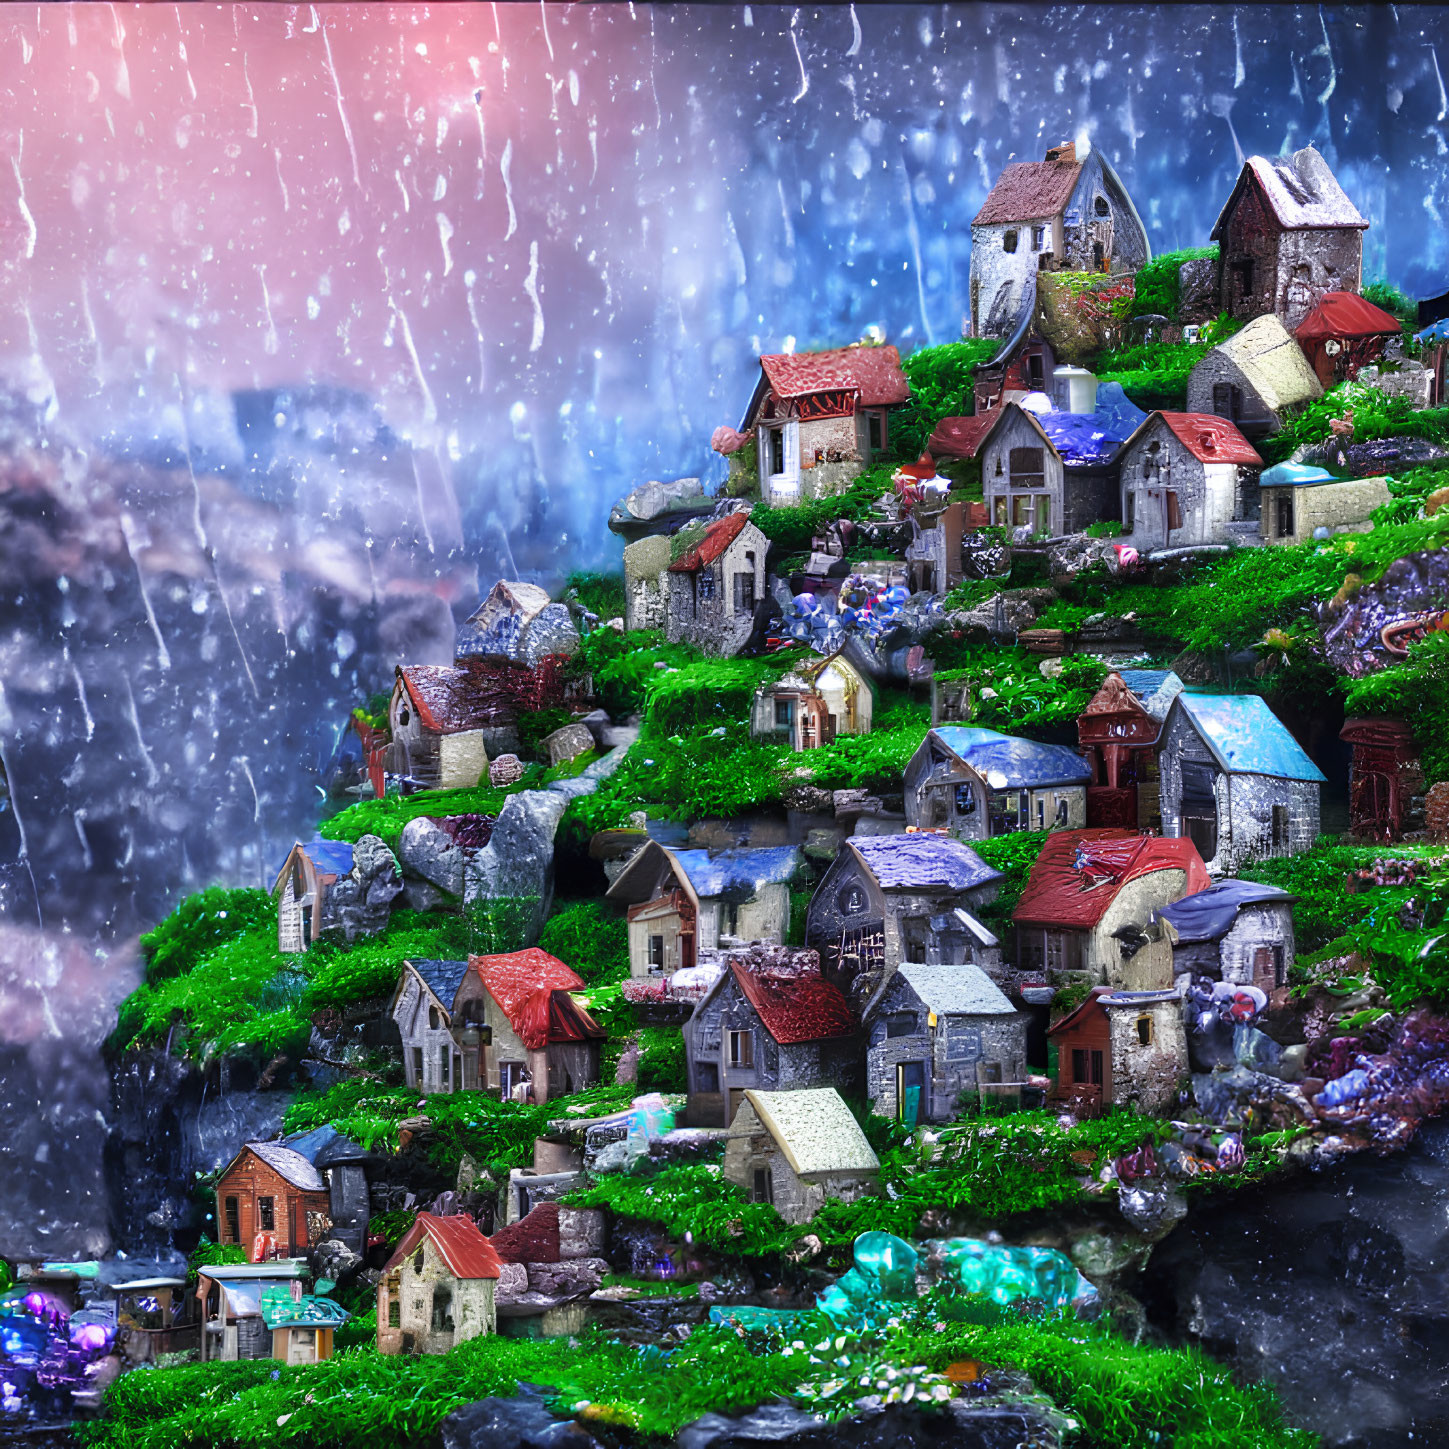 Miniature Village with Sparkling Lights in Lush Green Landscape